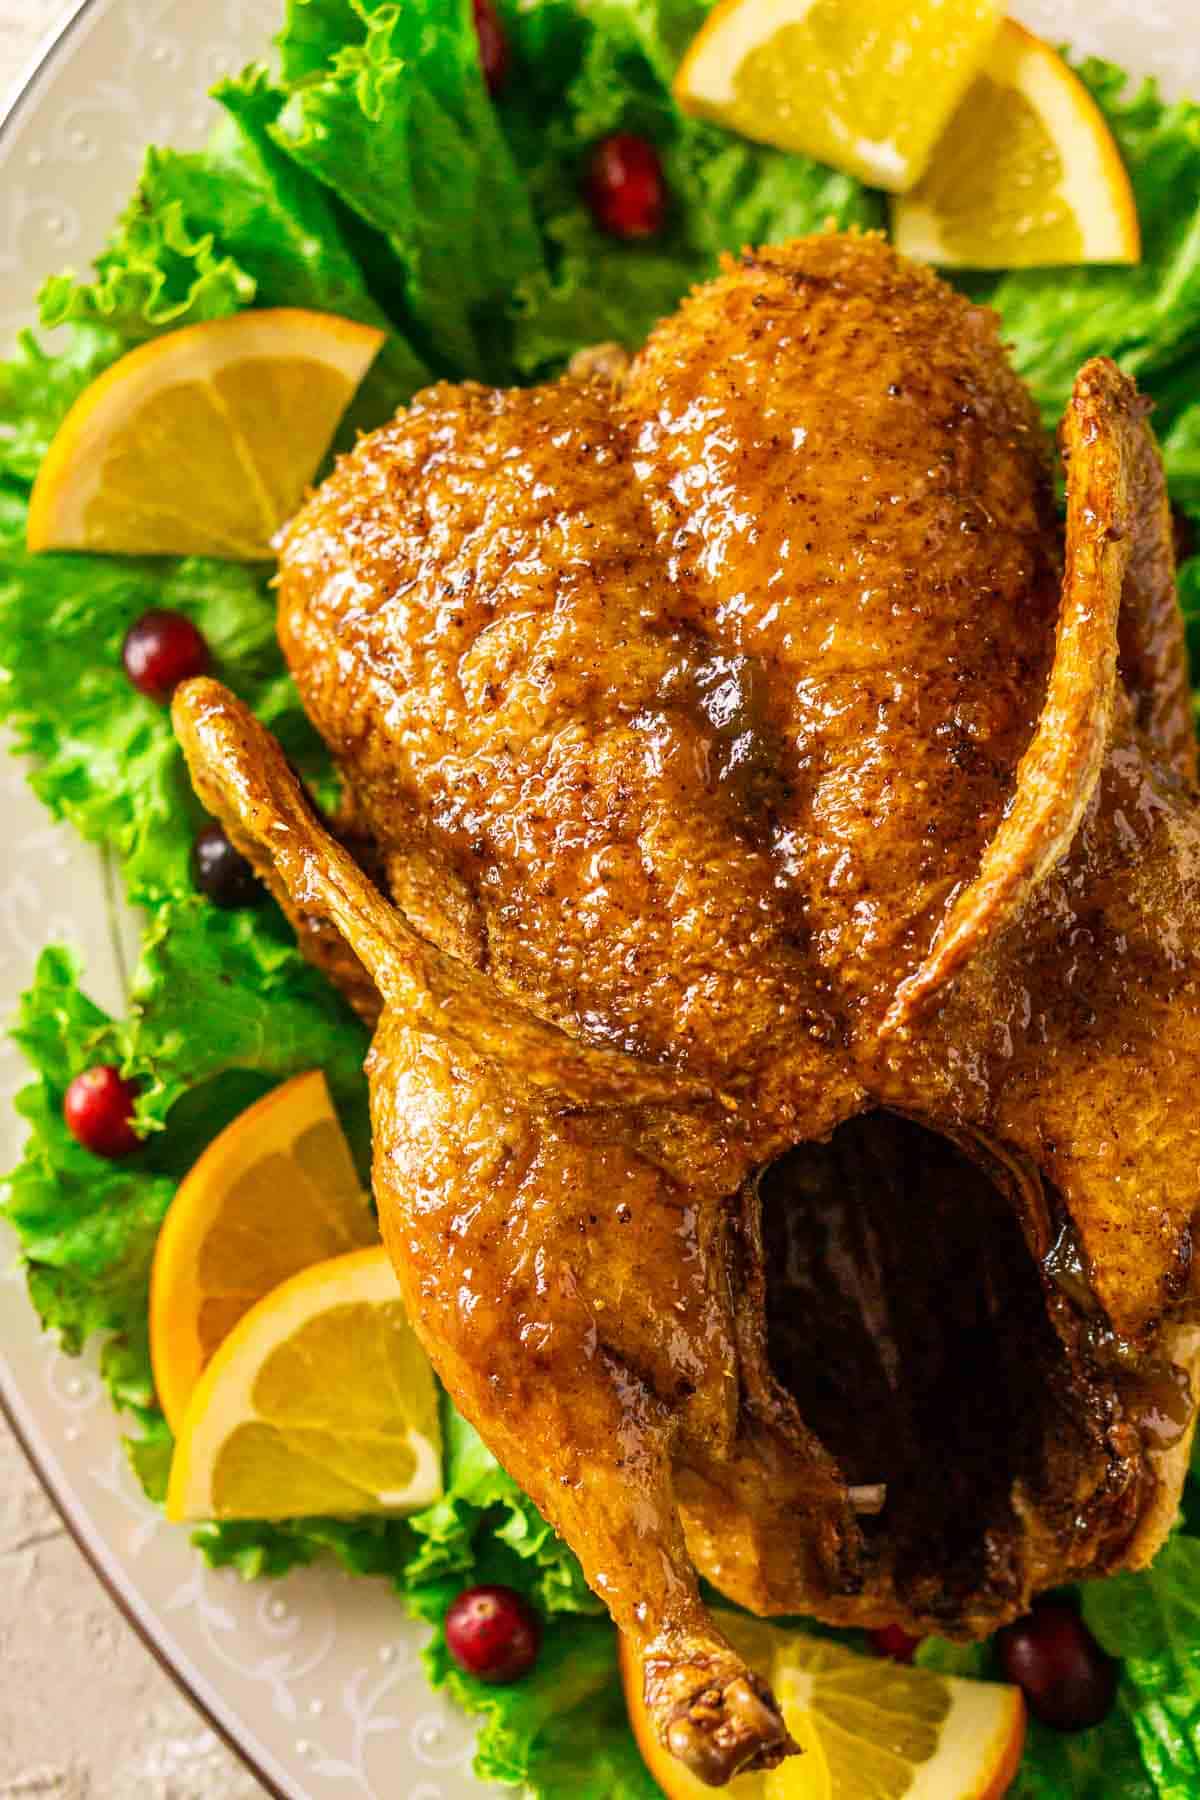 An aerial shot of the deep-fried duck on a white serving platter with green leaf lettuce, orange slices and fresh cranberries.